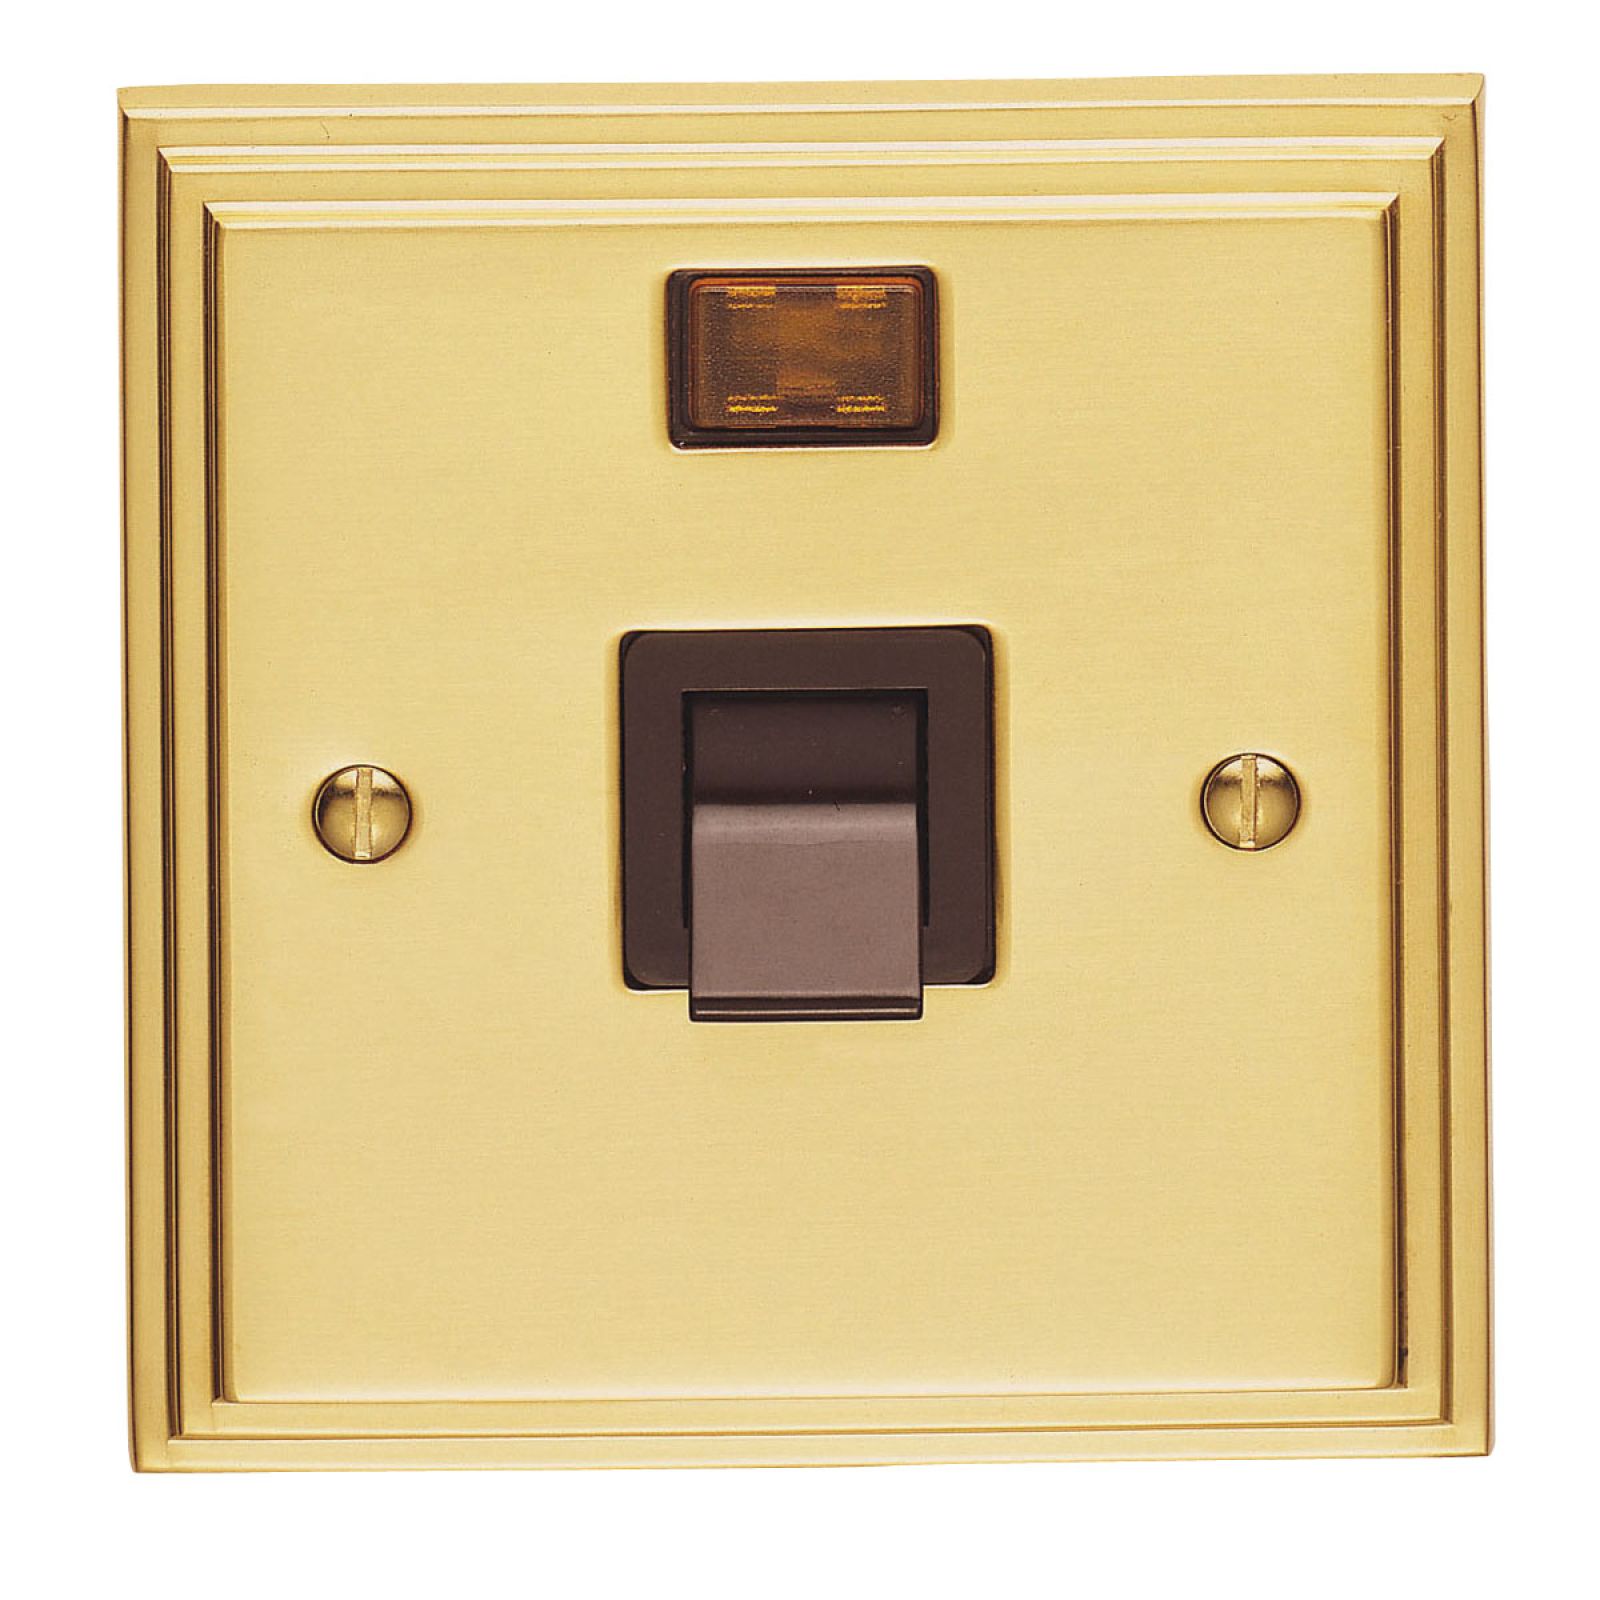 Stepped 1 Gang 45amp DP Cooker Switch & Neon - brass, chrome or satin chrome